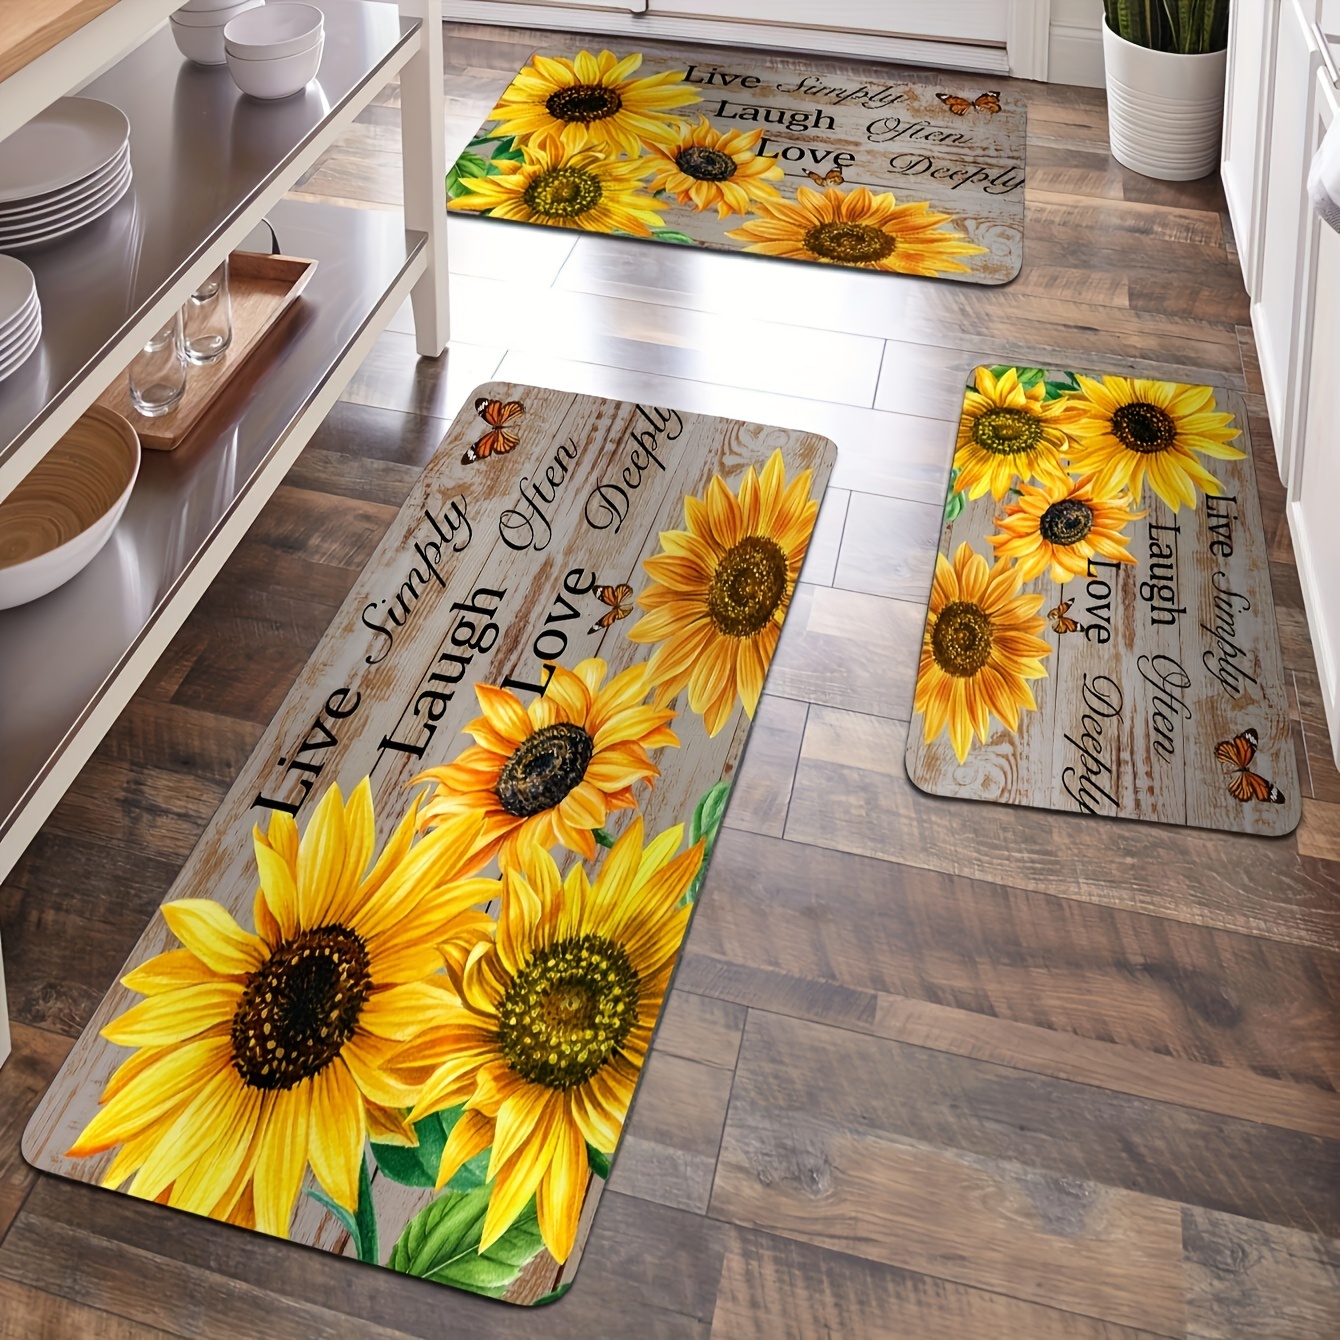 

Sunflower Kitchen Rug Set 3 Pieces, Non-slip Water Absorbent Polyester Mats, Machine Washable, Rectangle Shape, Includes Sizes 40x60cm, 50x80cm, 40x120cm For Bedroom, Living Room, Laundry & Bathroom